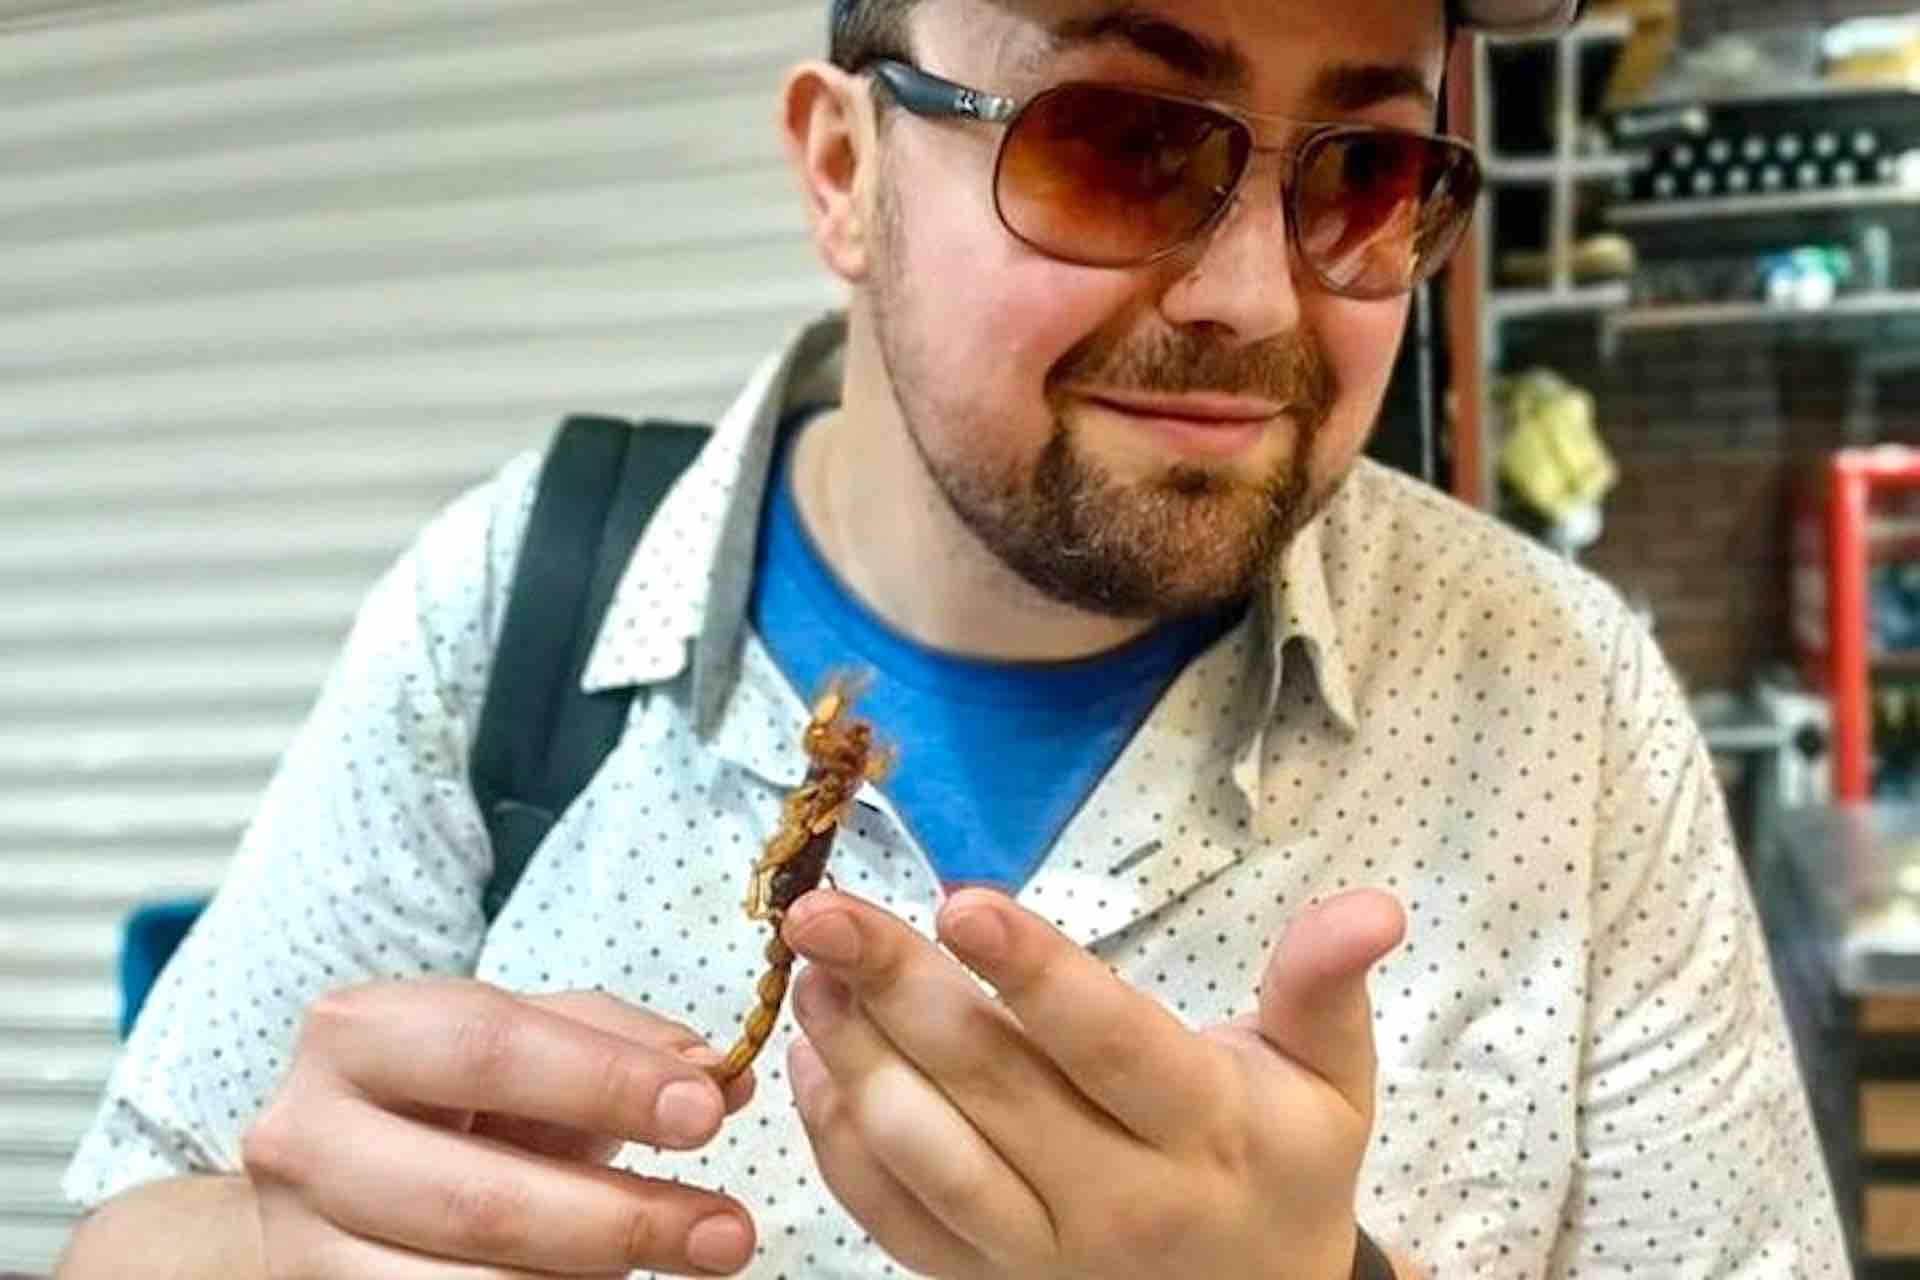 Mexico City Culinary Tour guest with scorpion